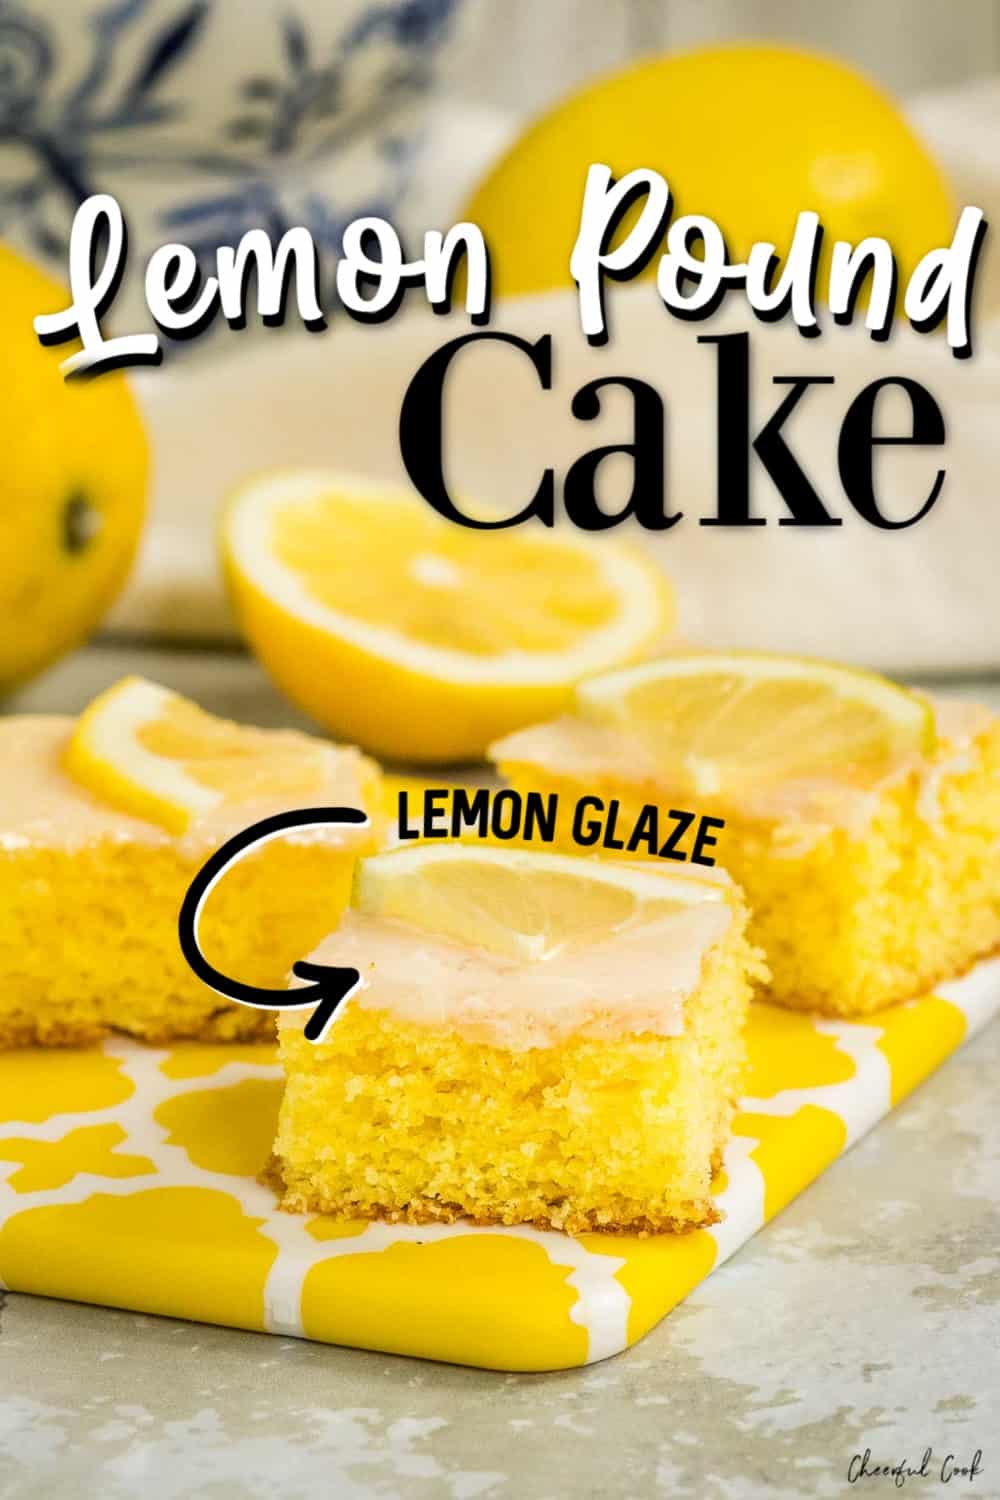 Light and airy, sweet and moist this lemon infused glazed German Pound Cake is incredibly delicious and easy to make. #cheerfulcook #german #lemon #poundcake #sheetcake #withglazeeasy ♡ cheerfulcook.com via @cheerfulcook